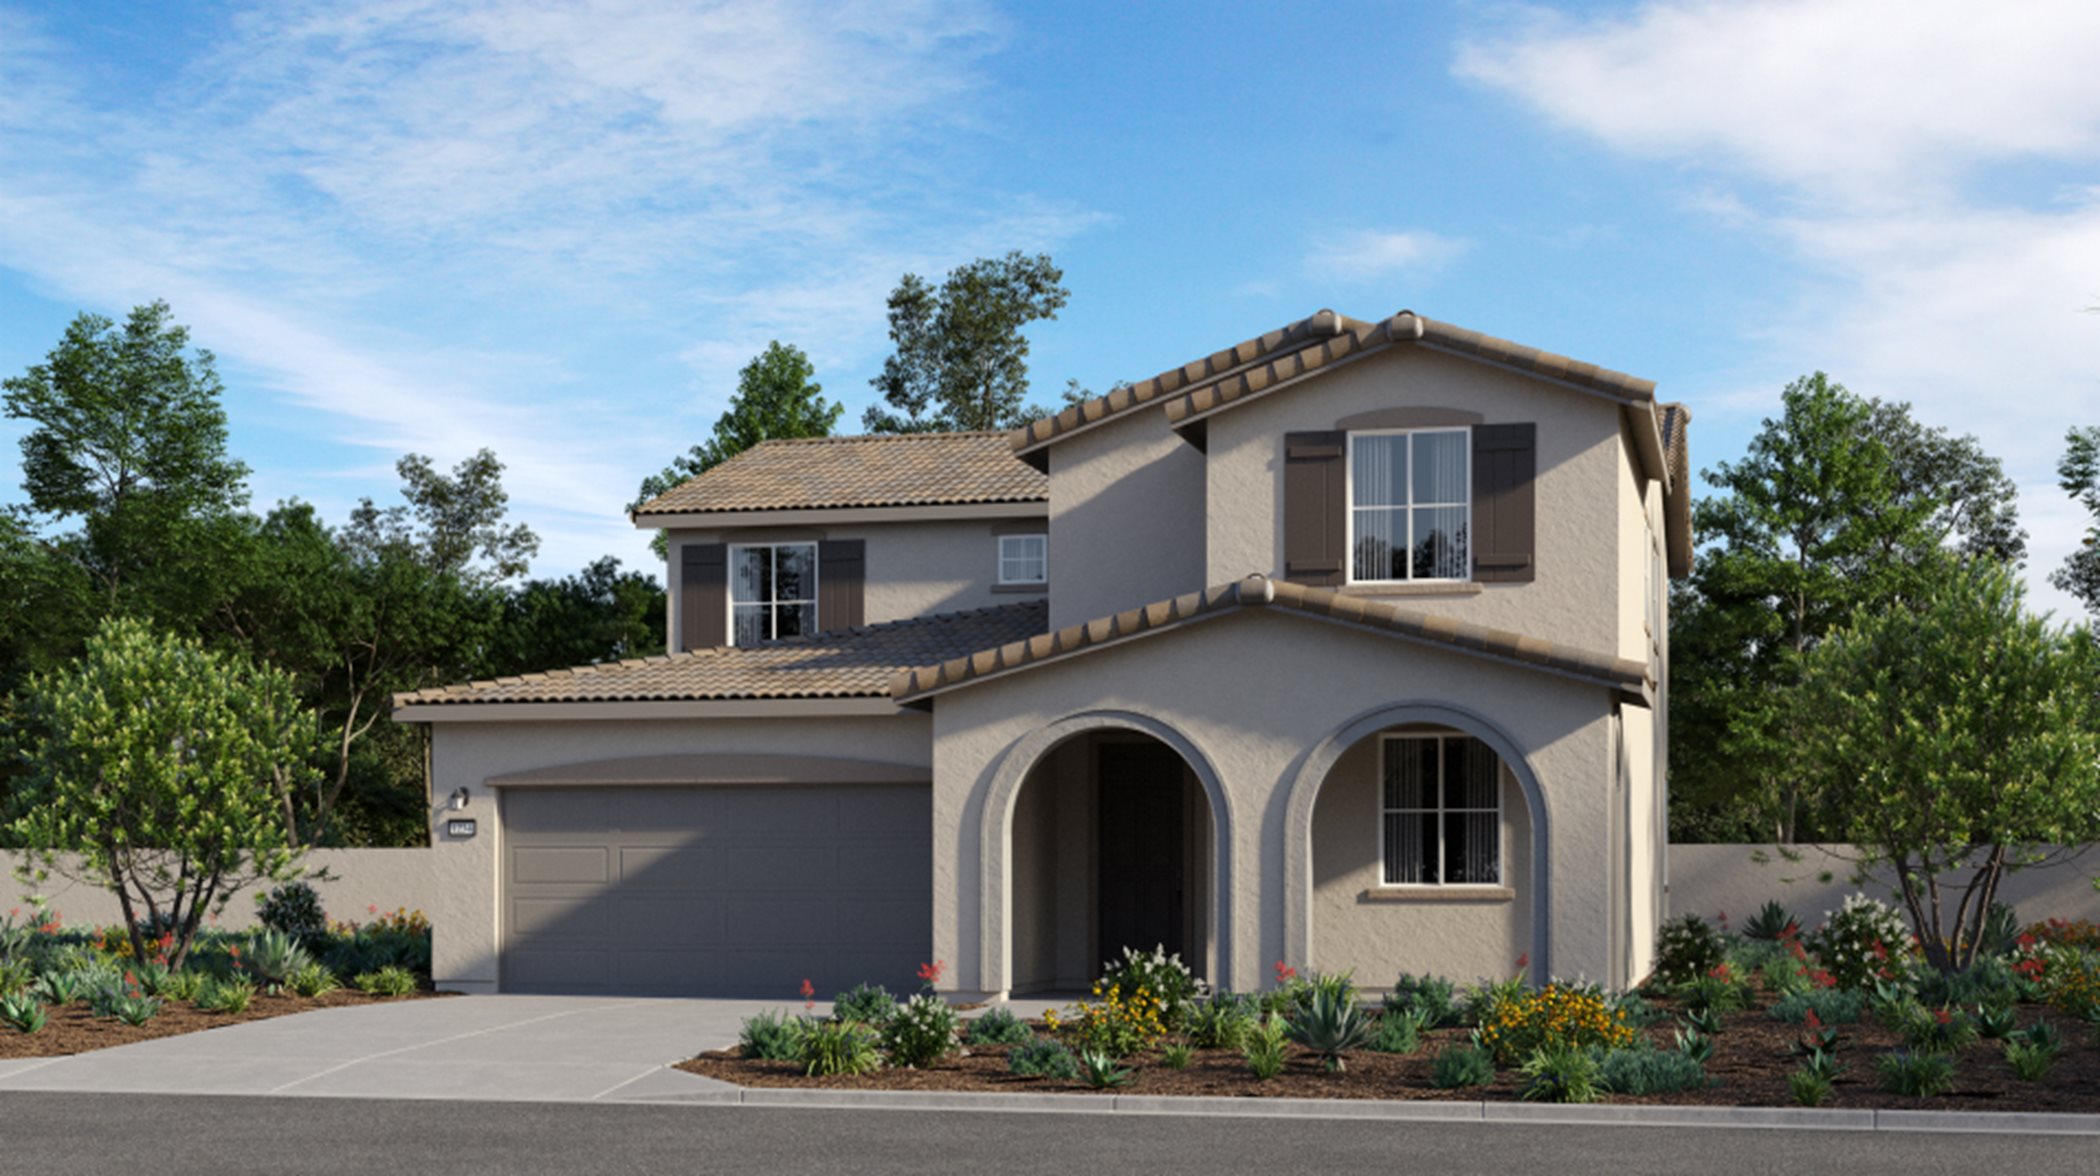 Spanish style home rendering